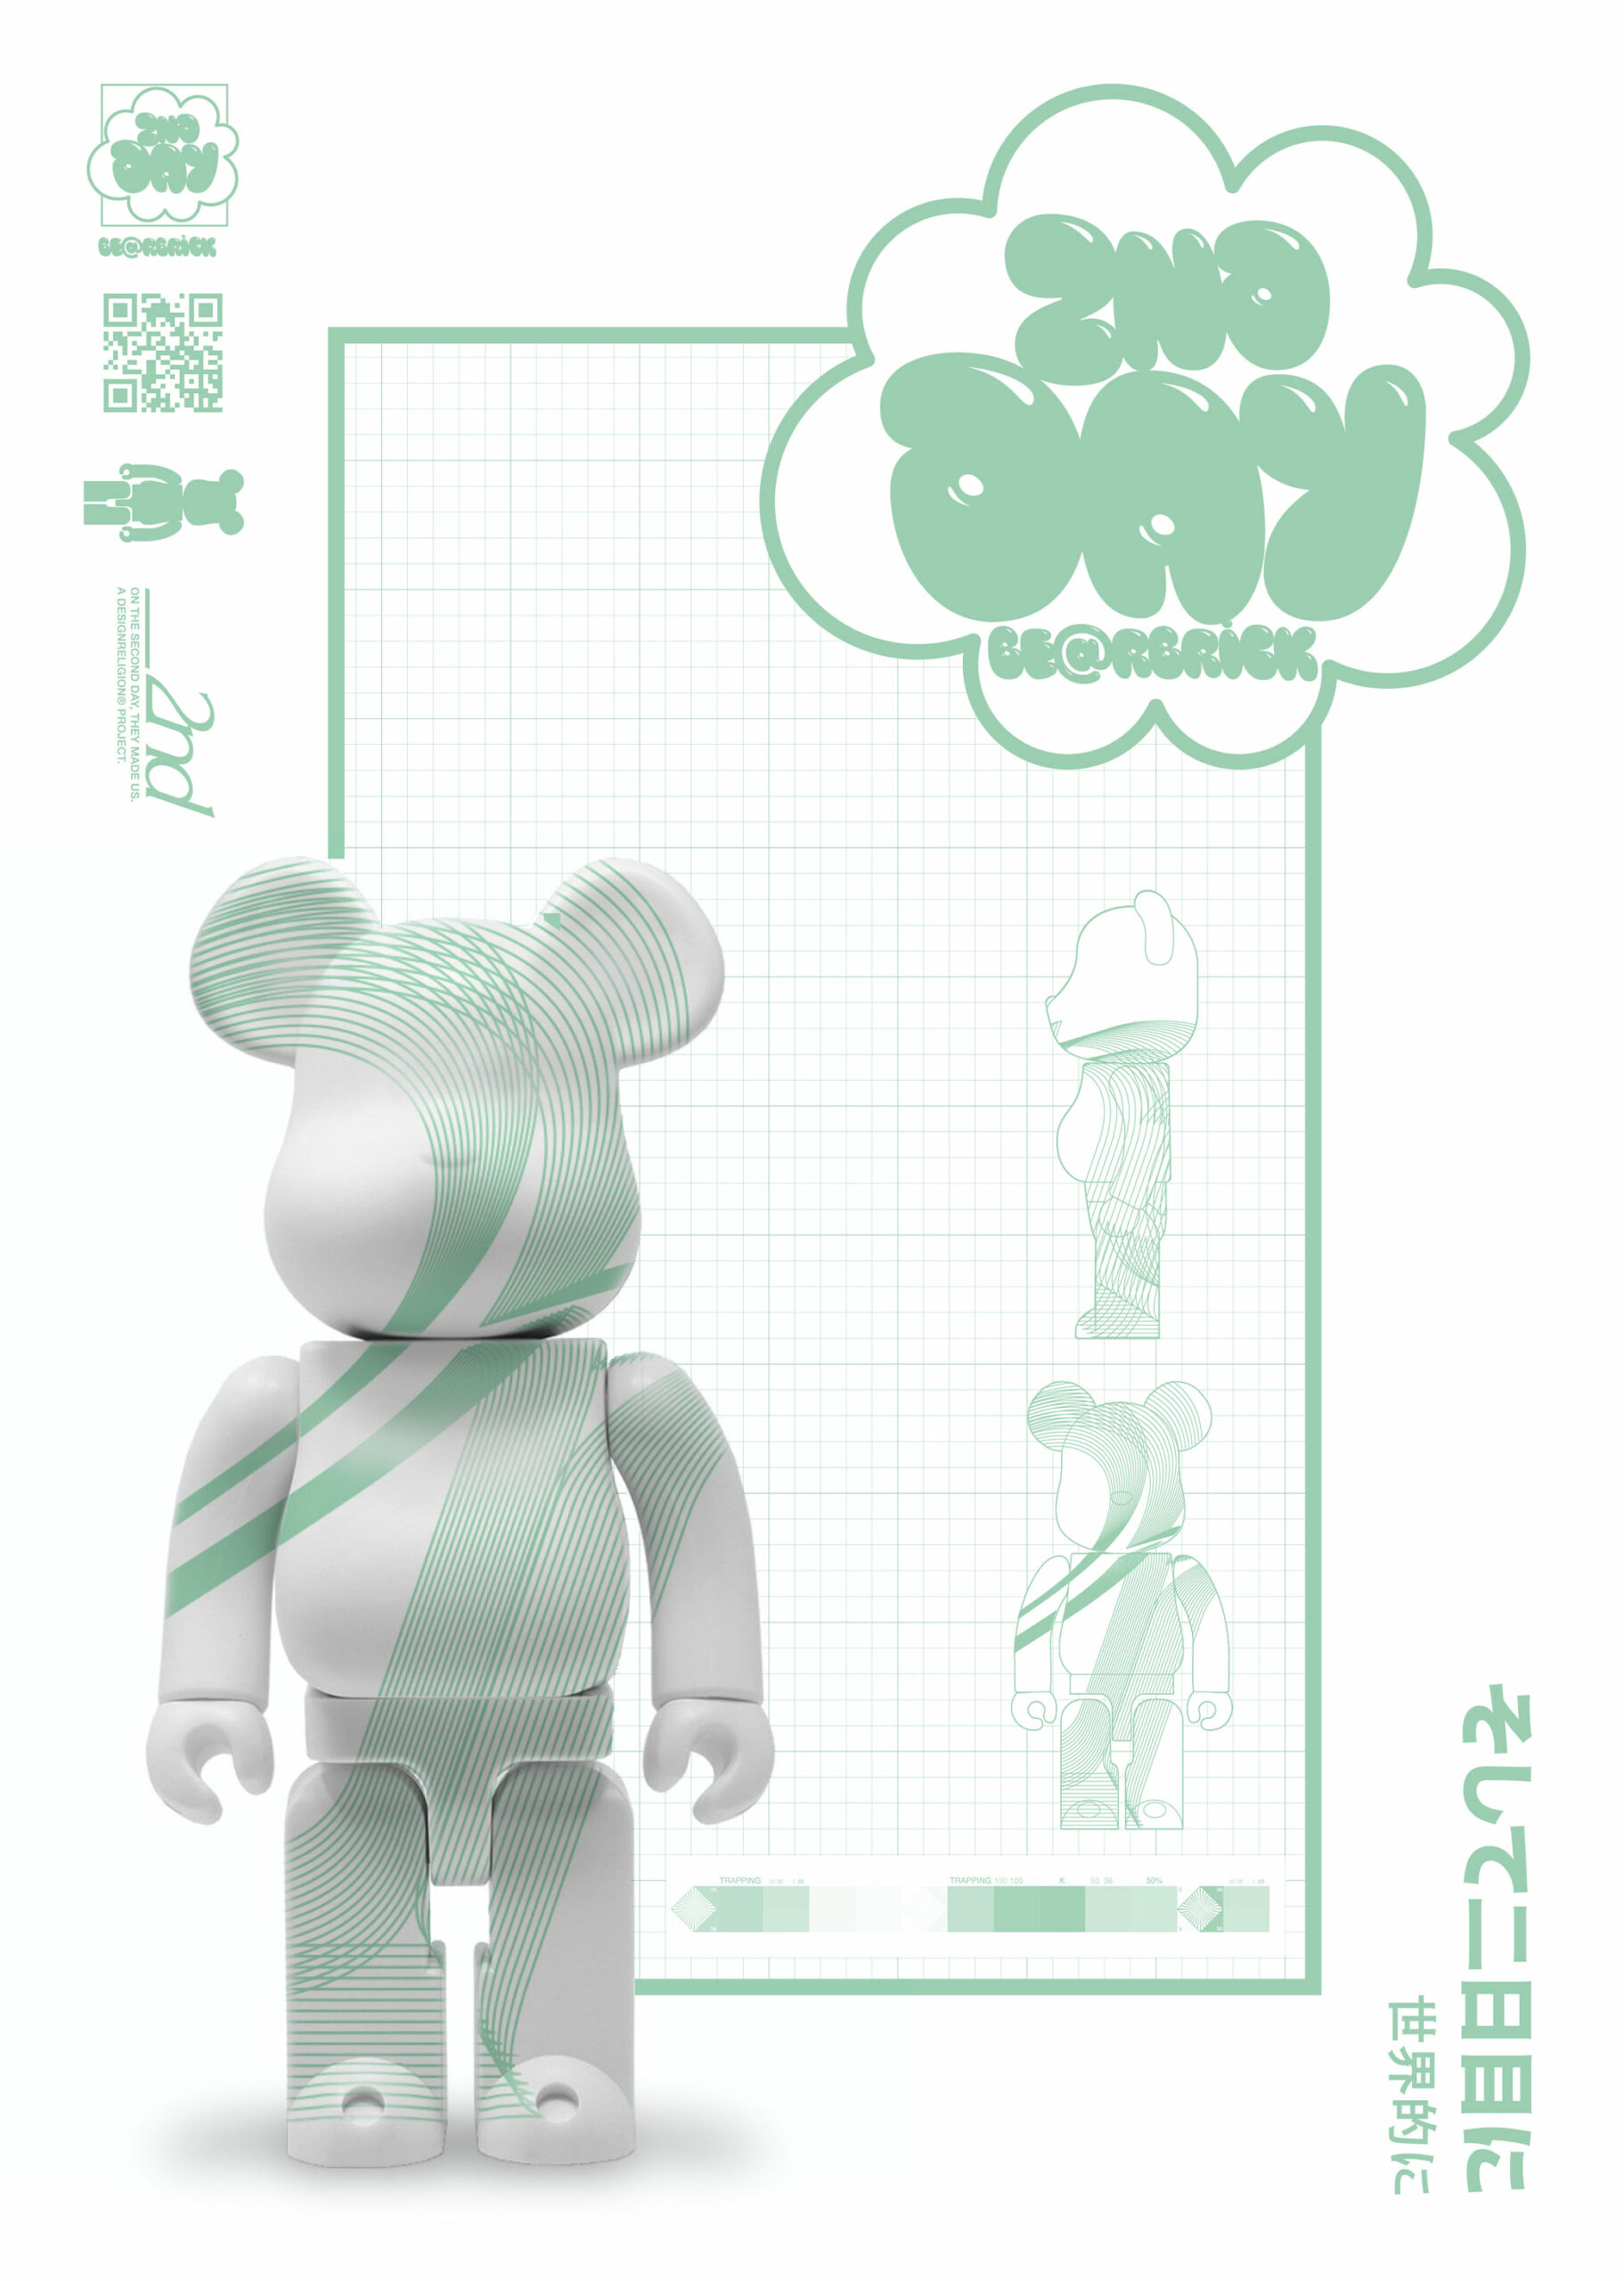 Poster design inspired by Japanese writing and using a Bearbrick mockup for 2nd Day